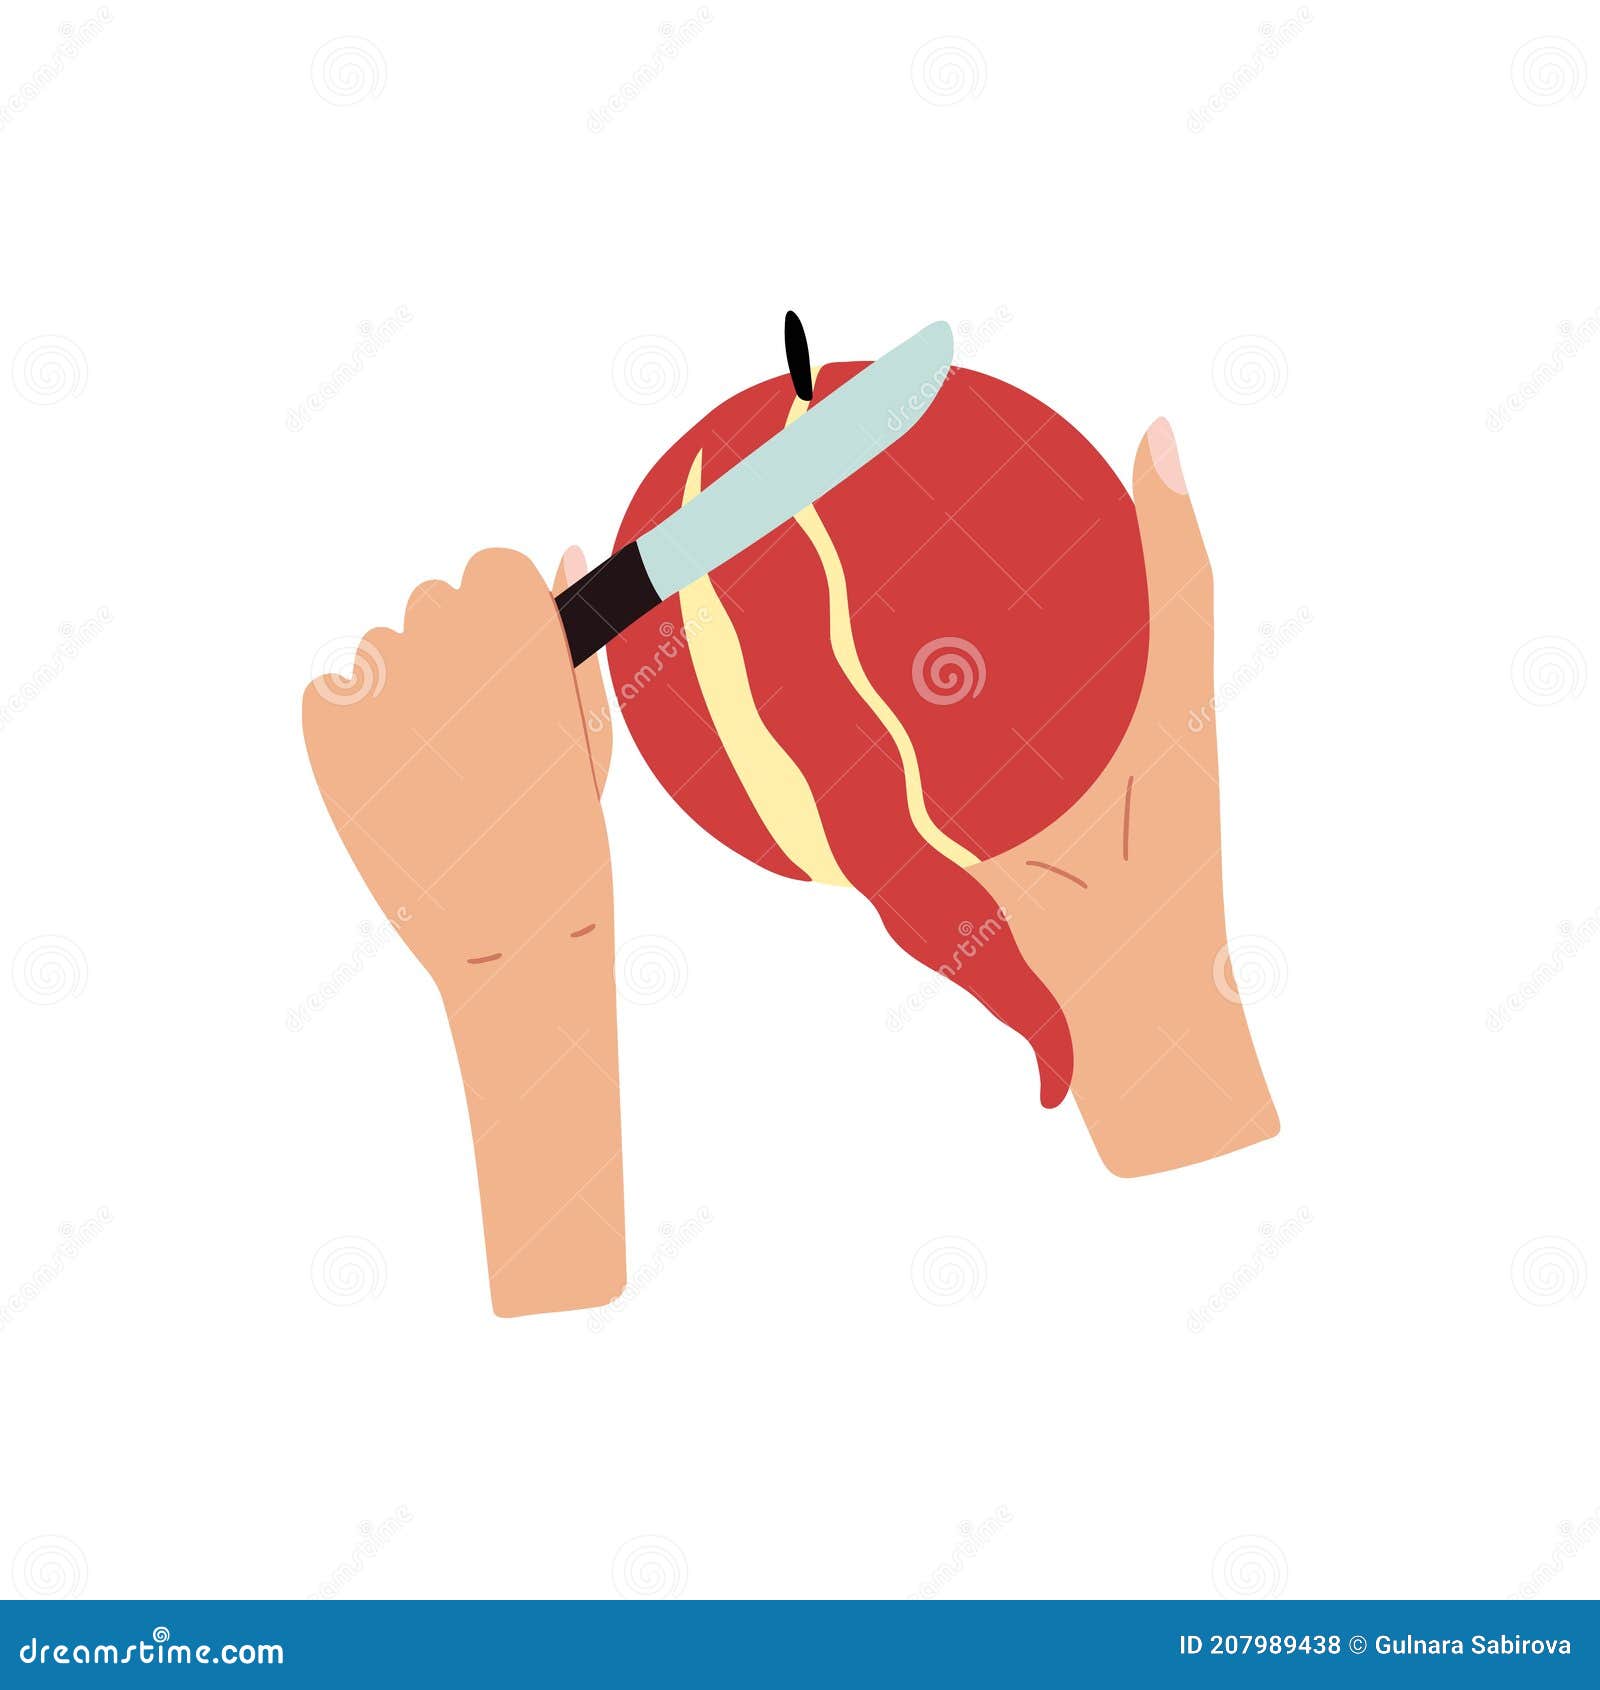 Hands Holding And Peeling An Apple With A Knife Peel Fruit Vector